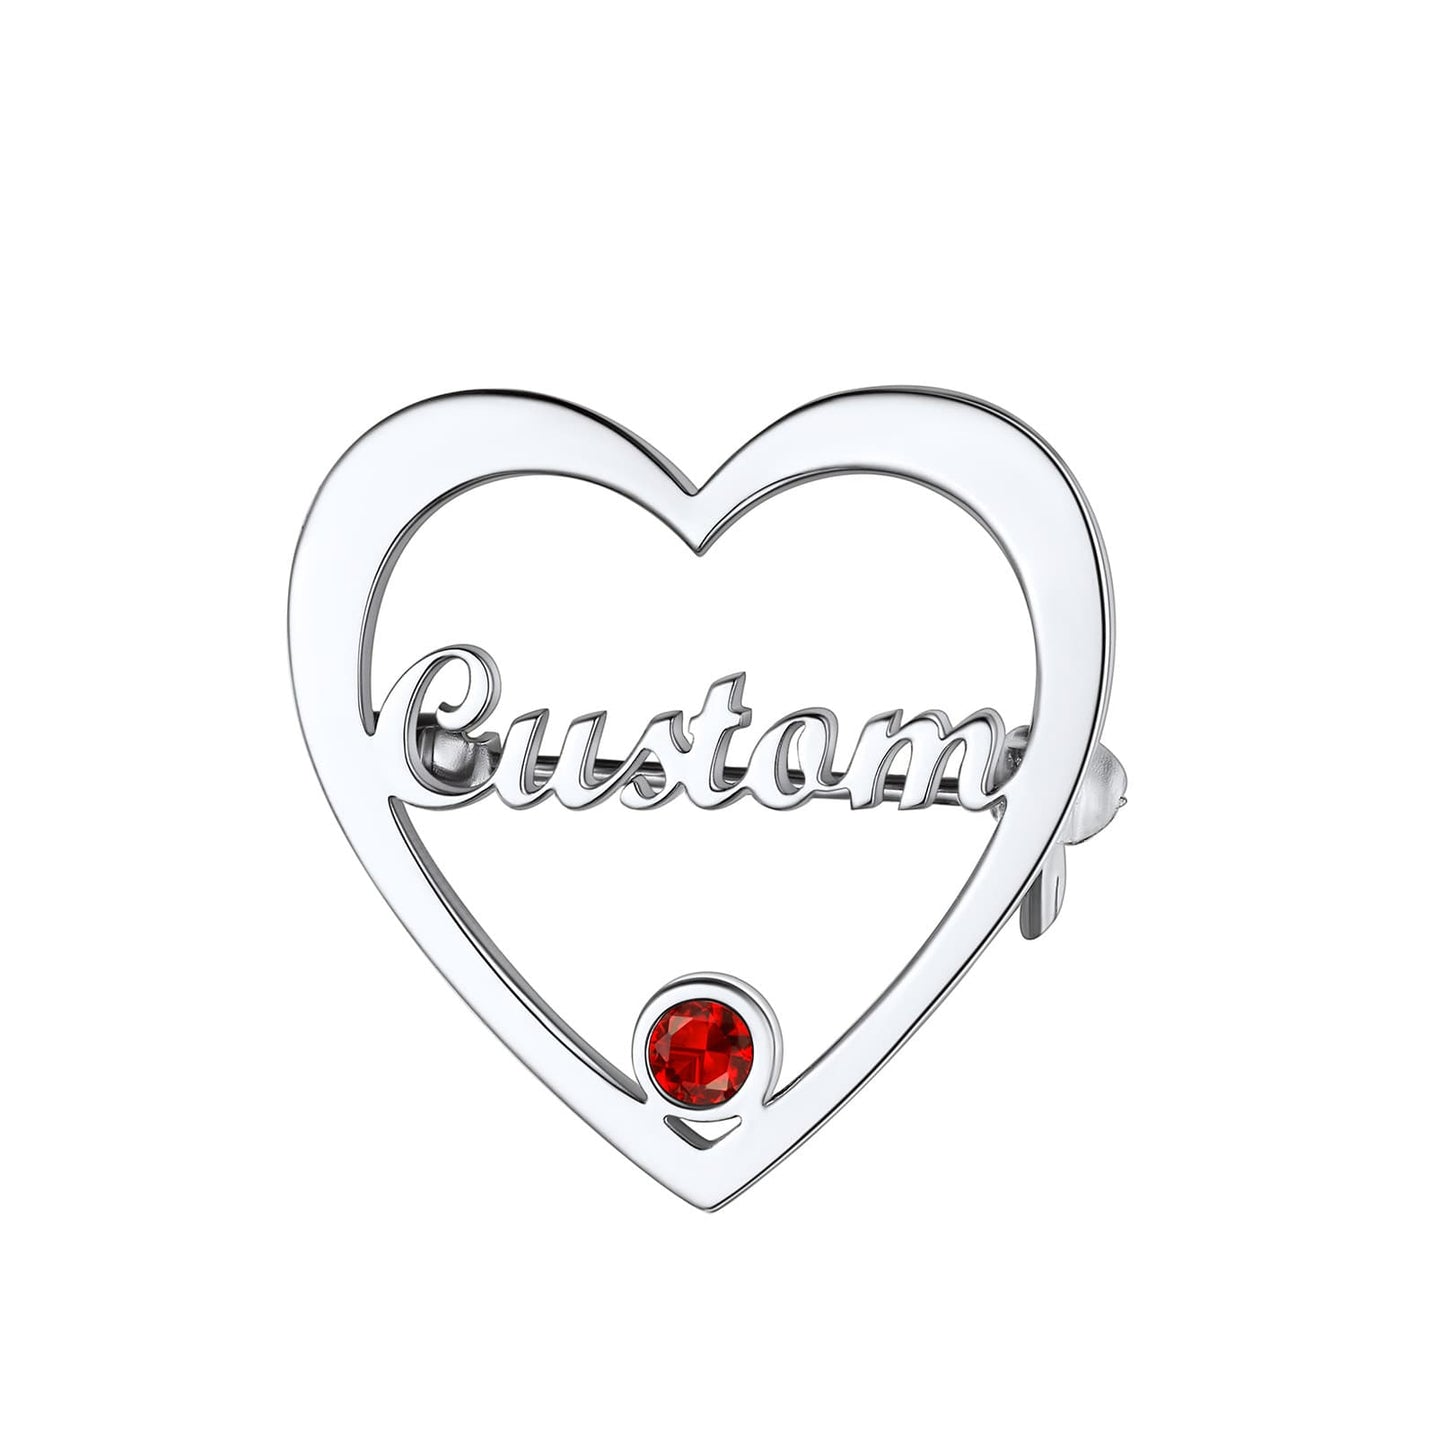 Birthstonesjewelry Personalized Heart Name Brooch Pin with Birthstone Steel